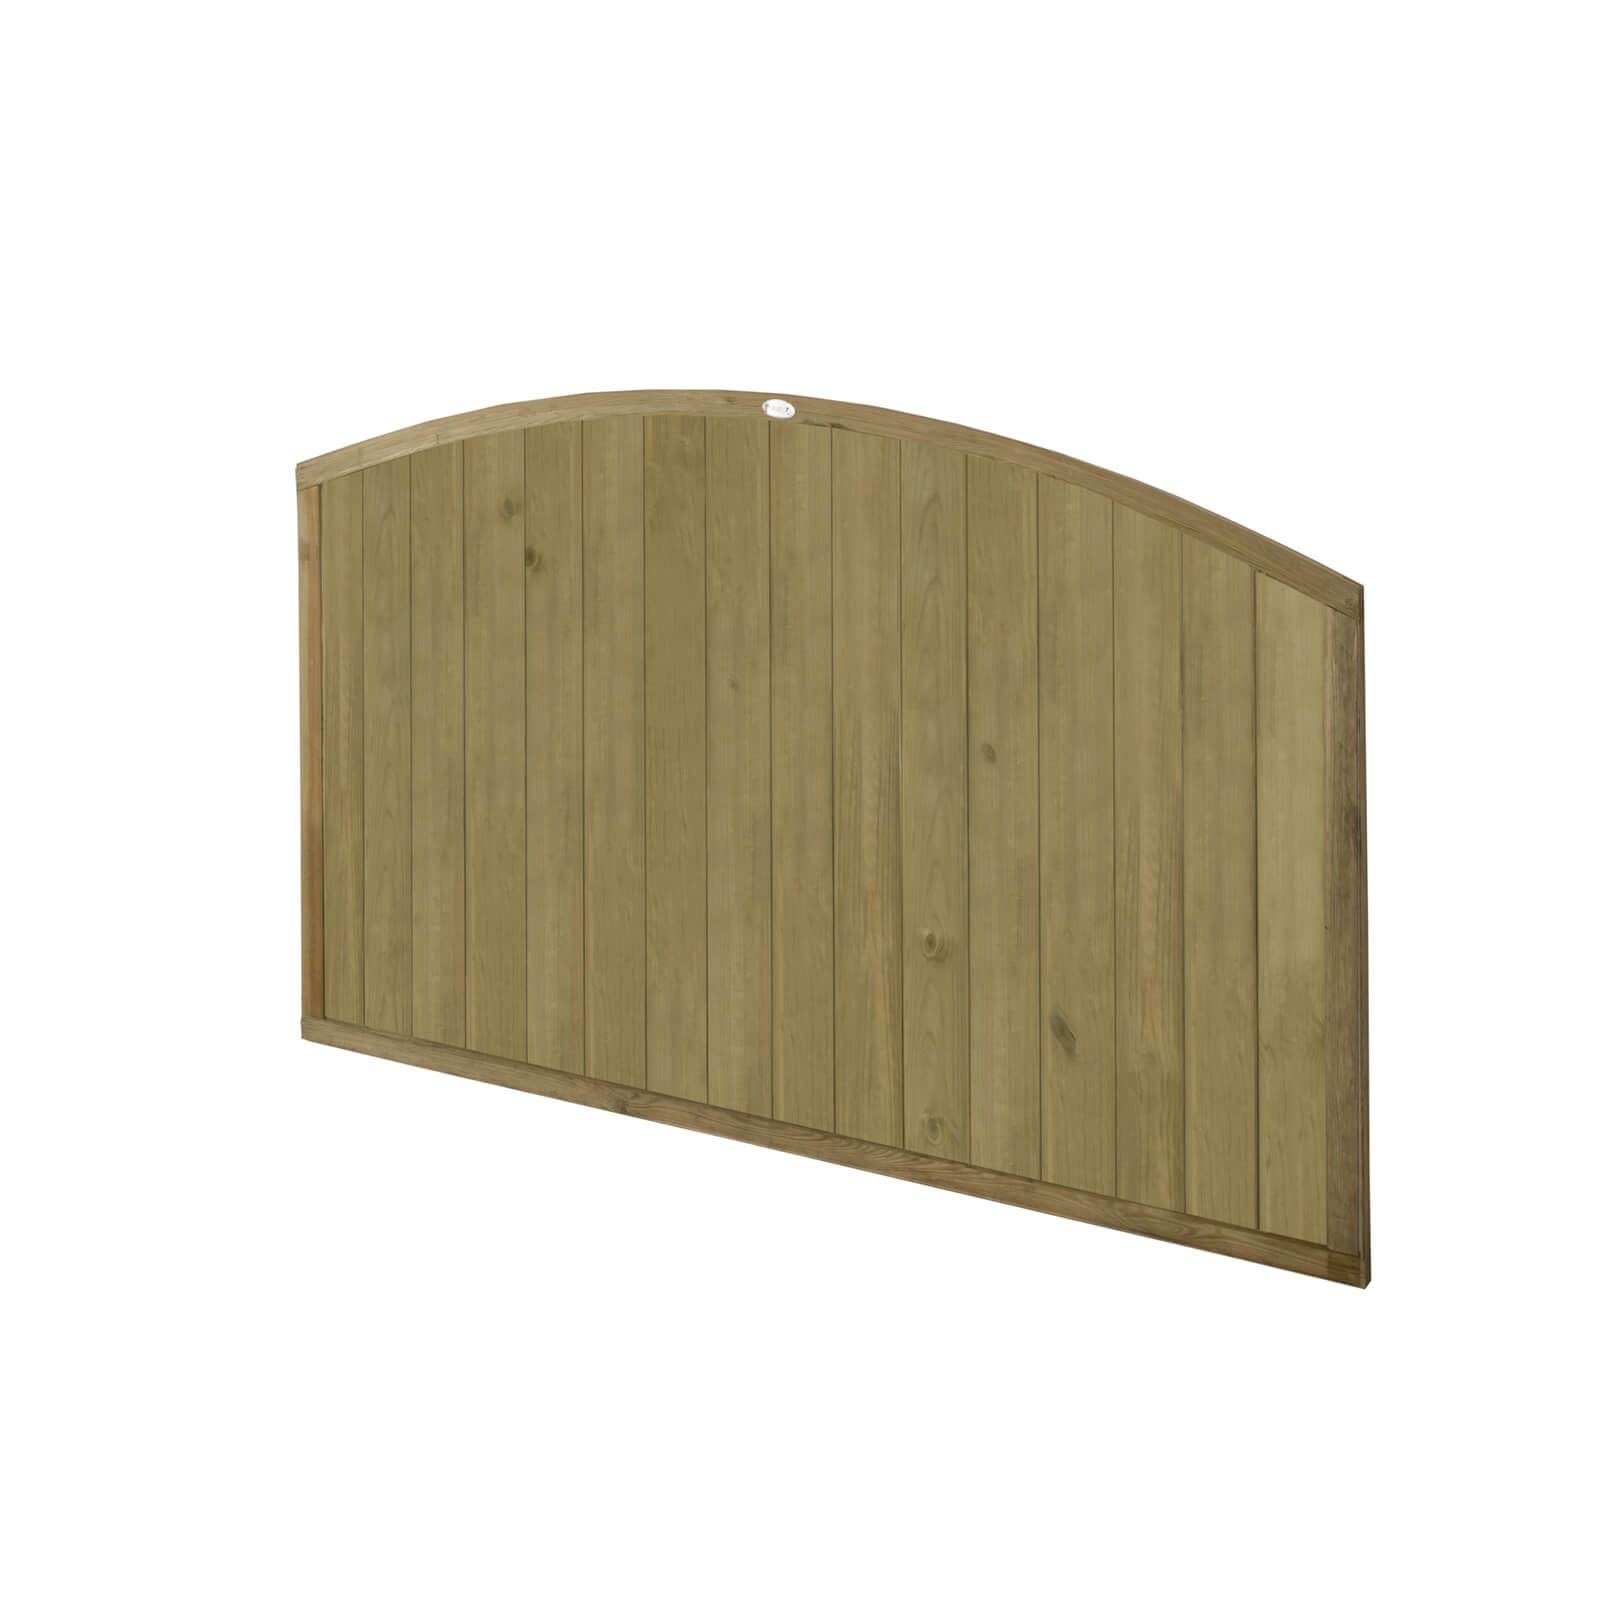 Forest Dome Tongue and Groove Panel - 4ft - Pack of 3